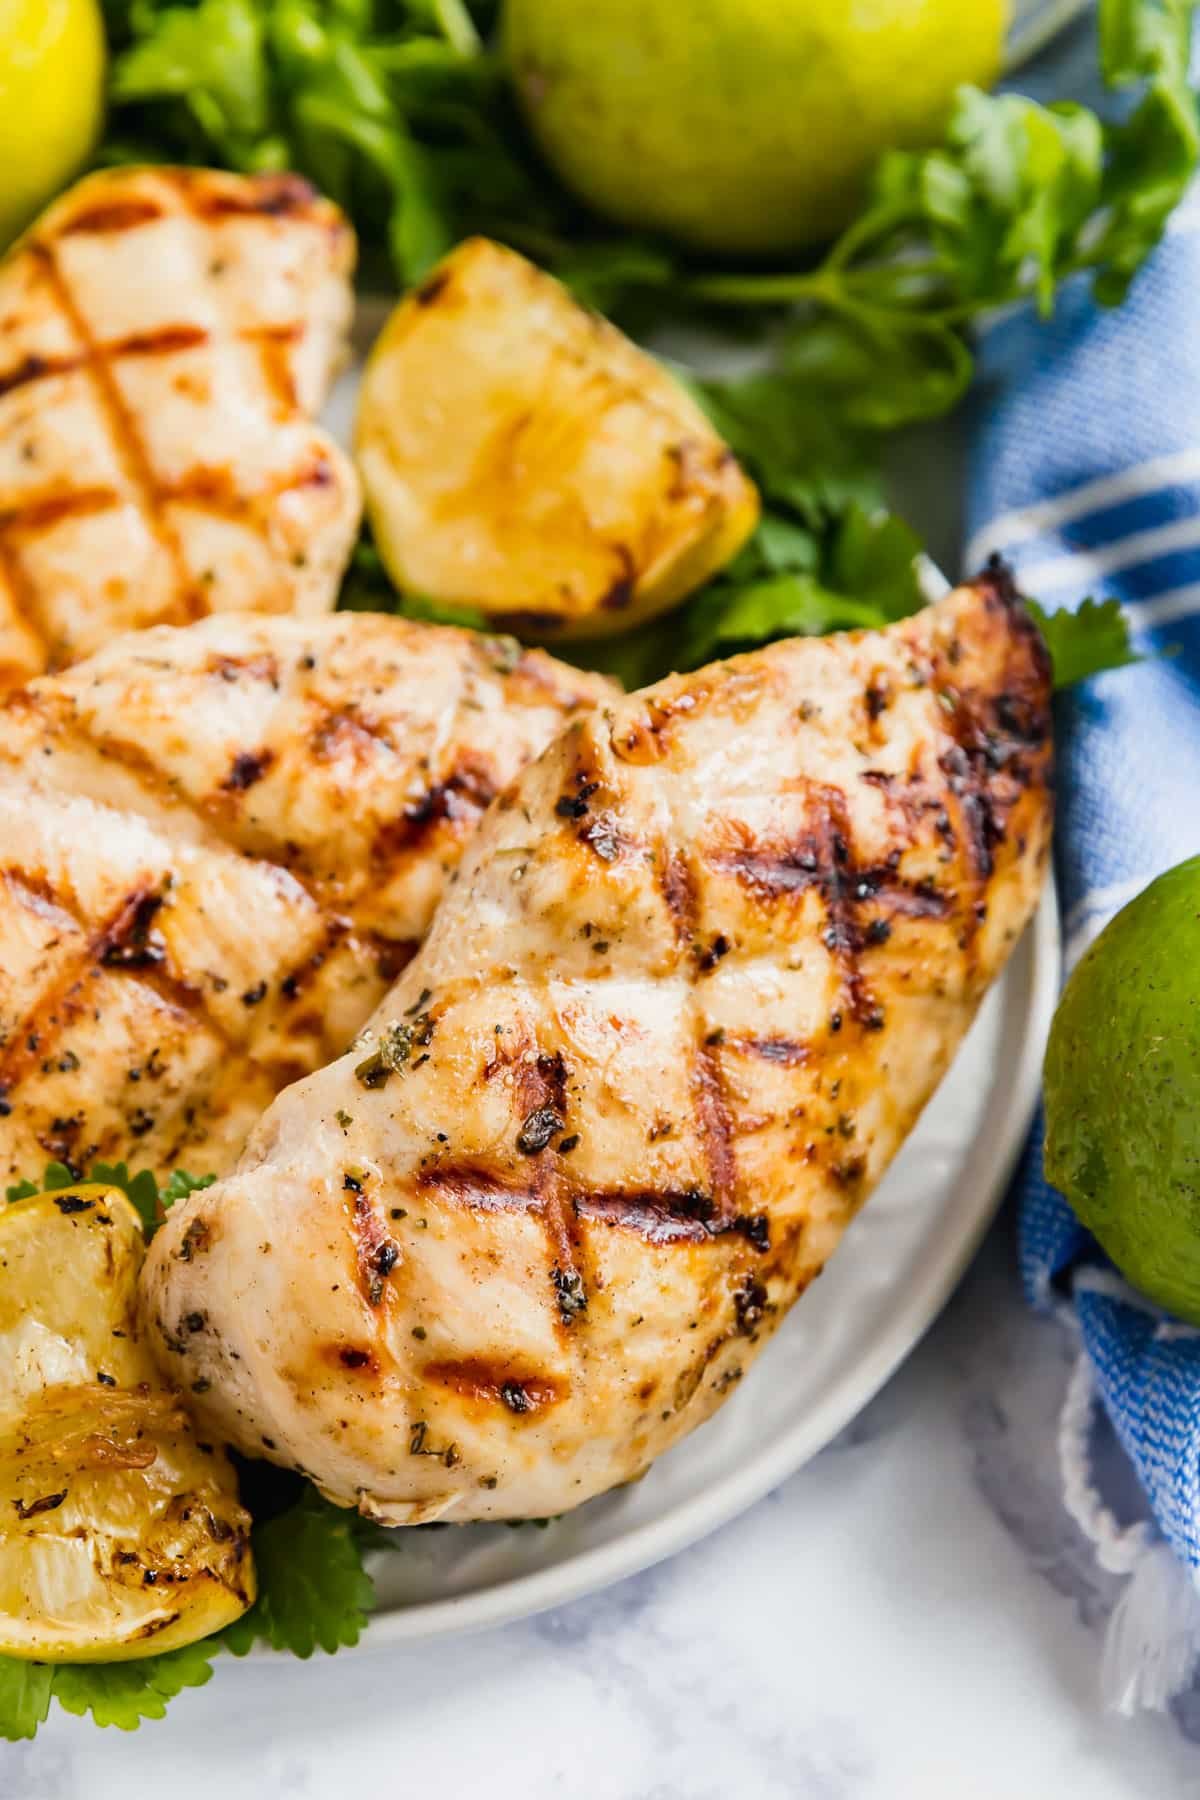 Focusing on a grilled chicken breast on the side of a plate of chicken with cilantro and limes in the background.